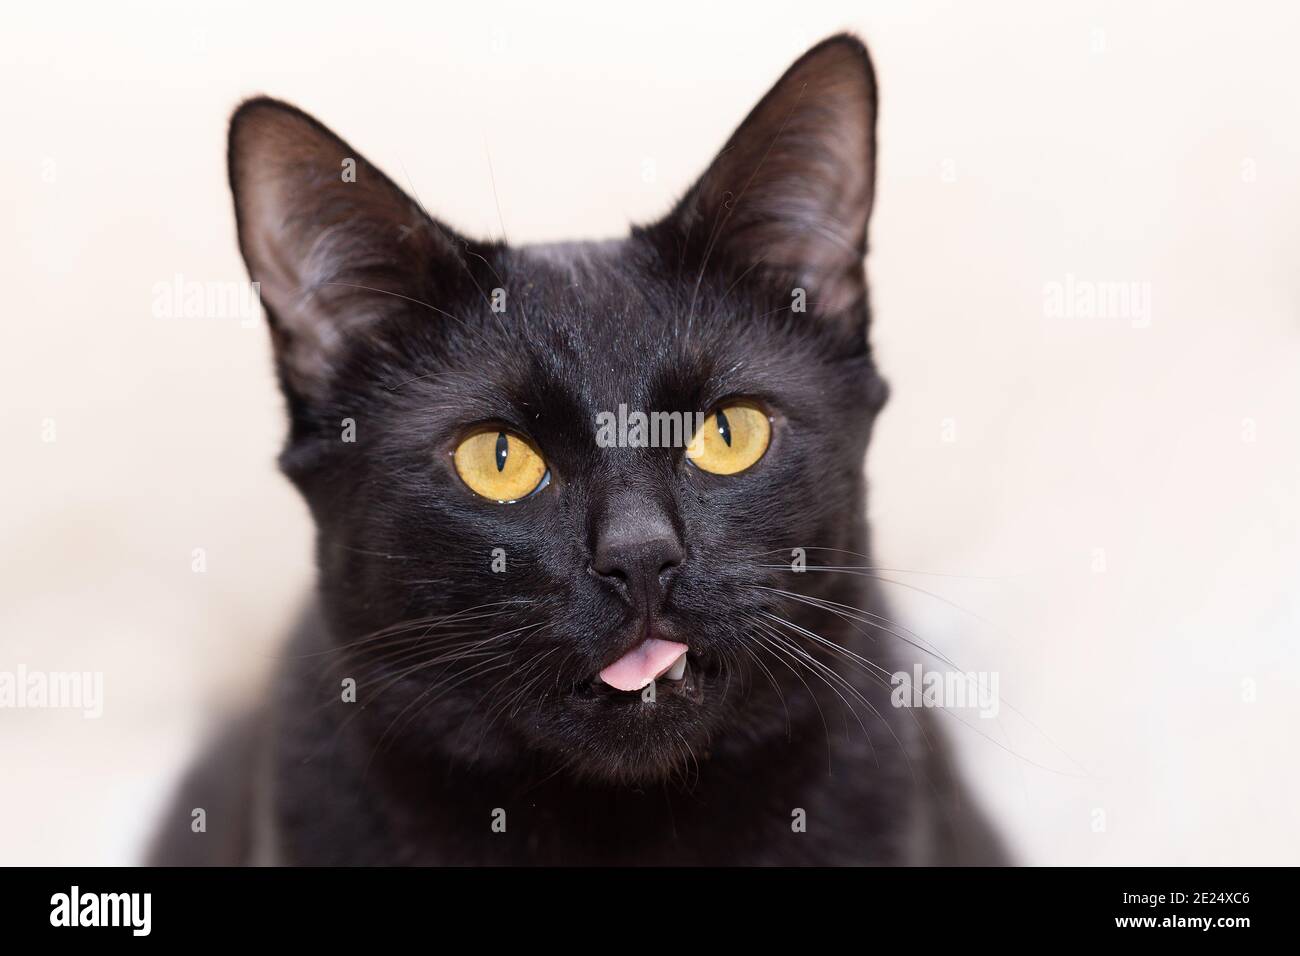 Portrait of a black cat with his mouth ajar against a light background Stock Photo